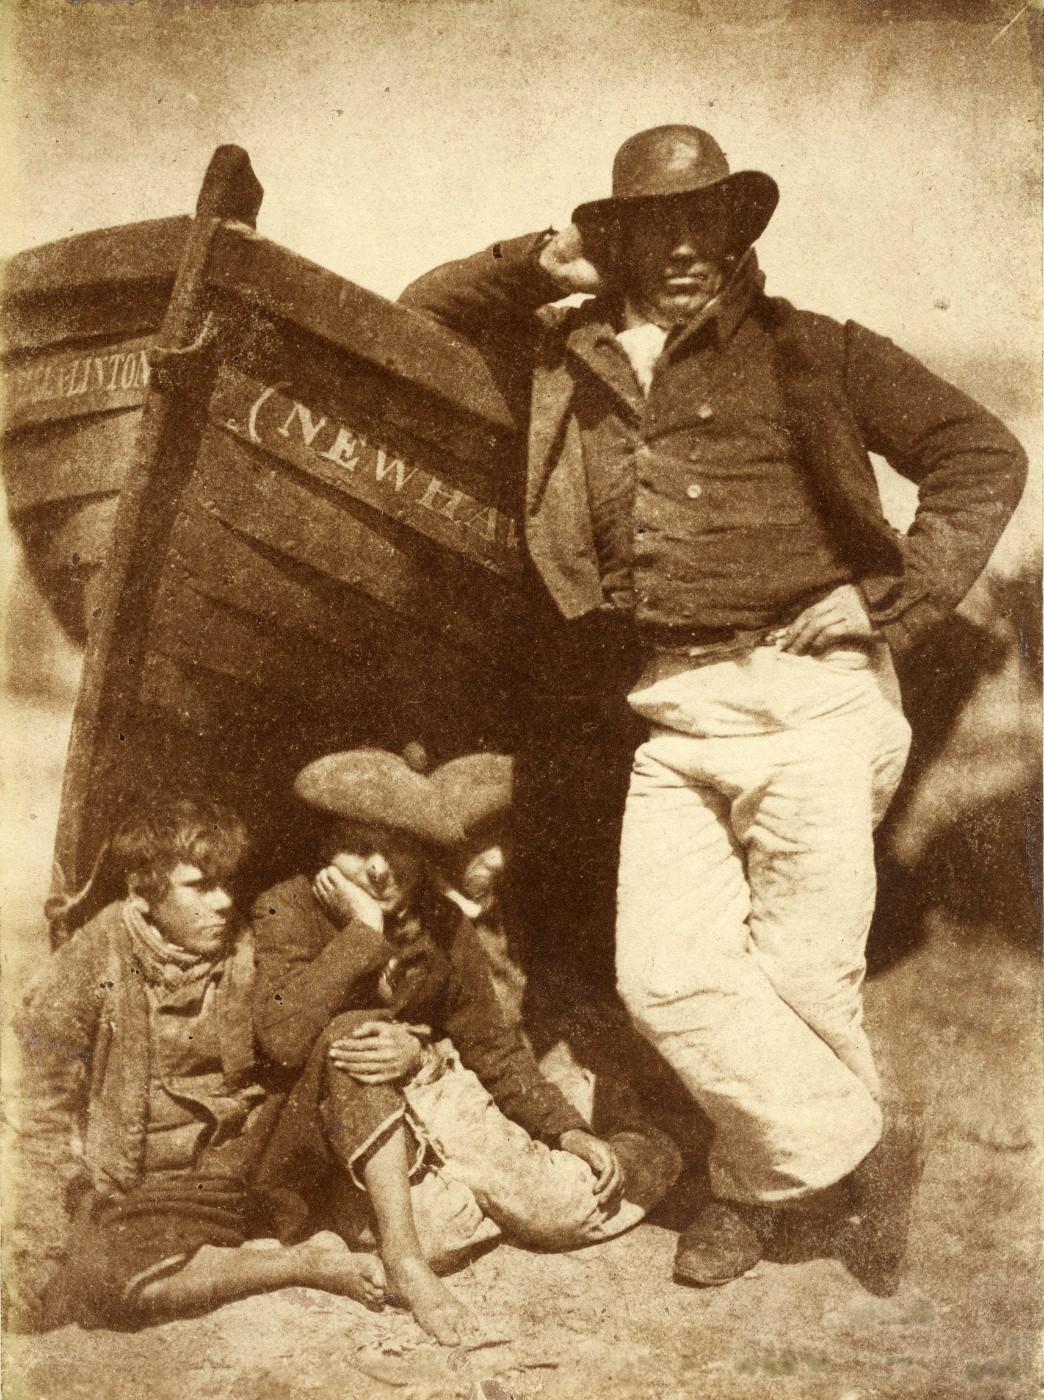 D.O. Hill and Robert Adamson, Sandy Linton, his boat and his bairns, New Haven, 1845